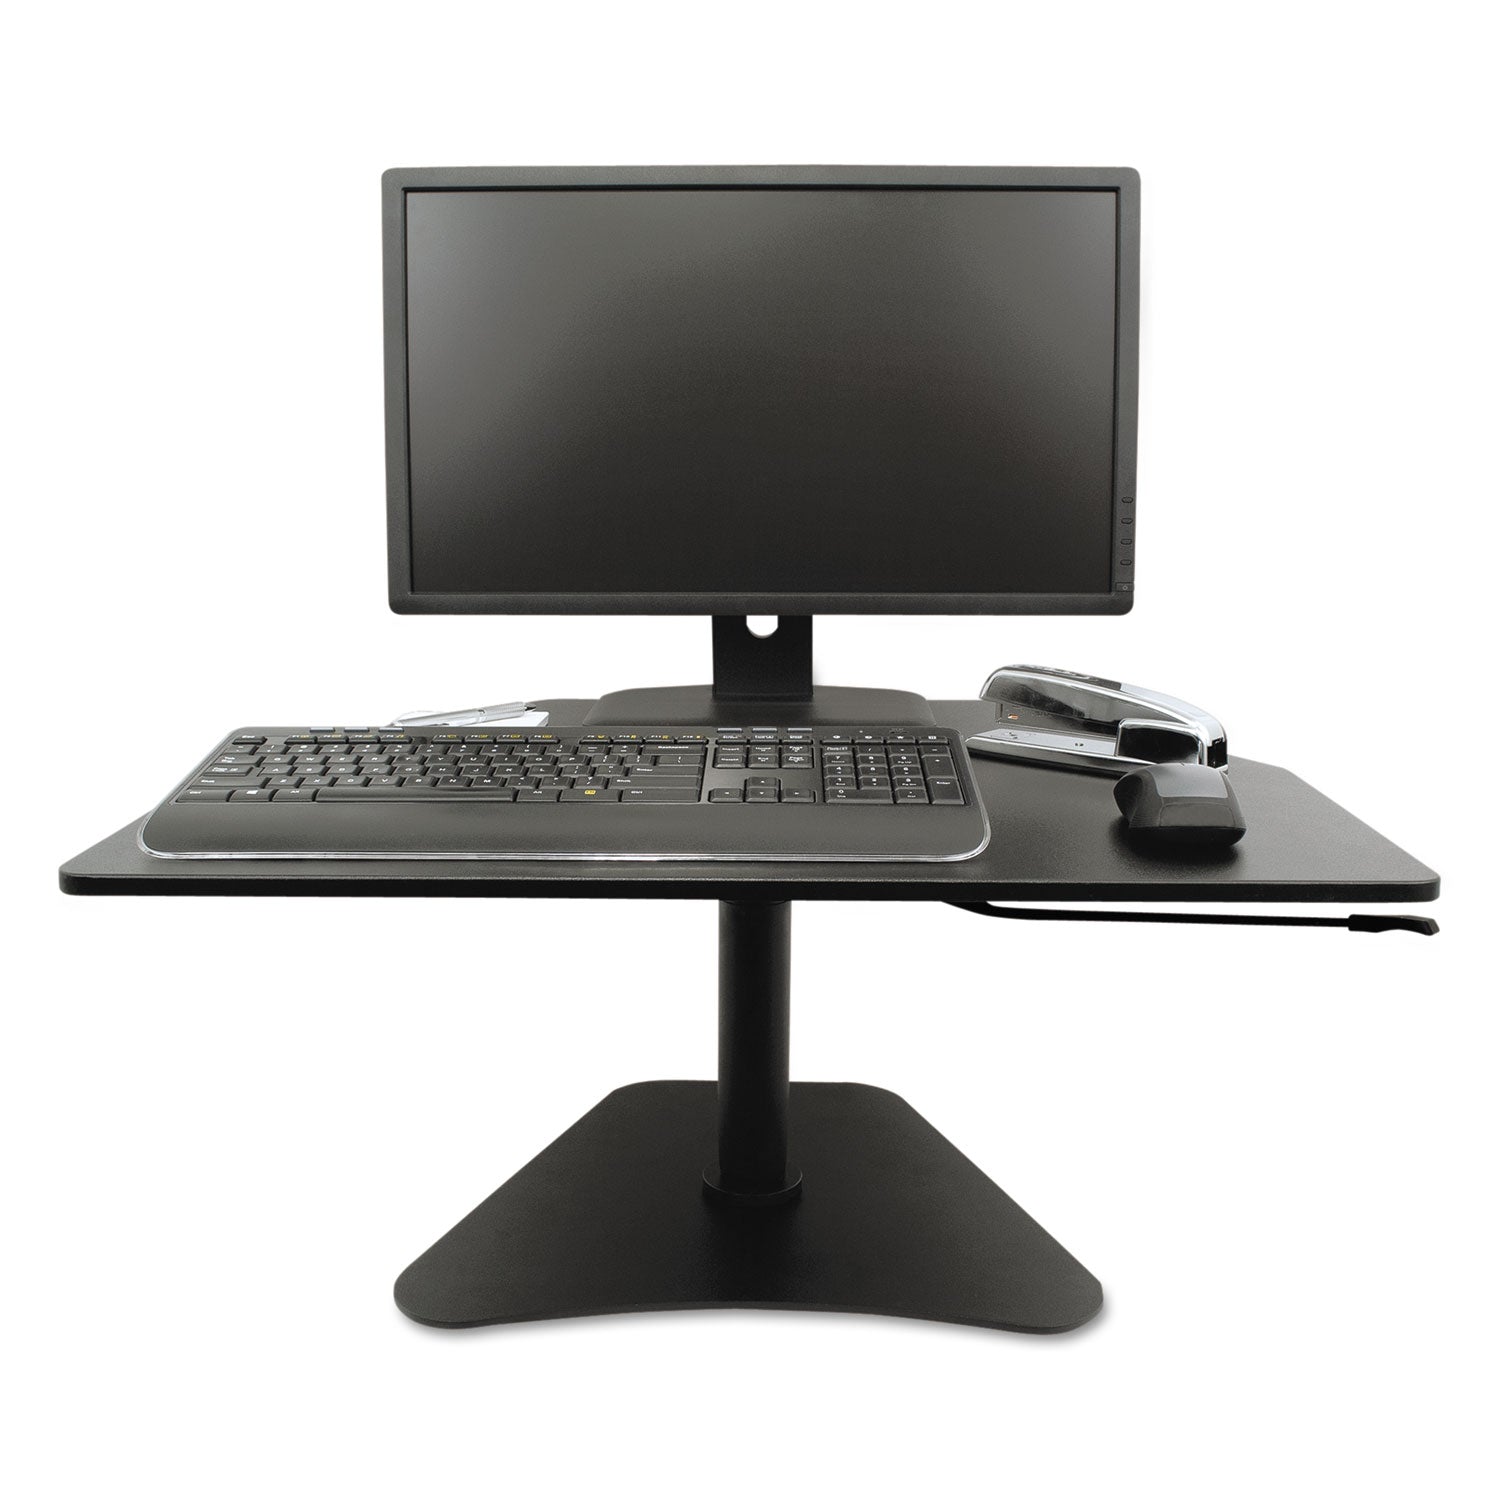 High Rise Adjustable Stand-Up Desk Converter, 28" x 23" x 12" to 16.75", Black, Ships in 1-3 Business Days - 2